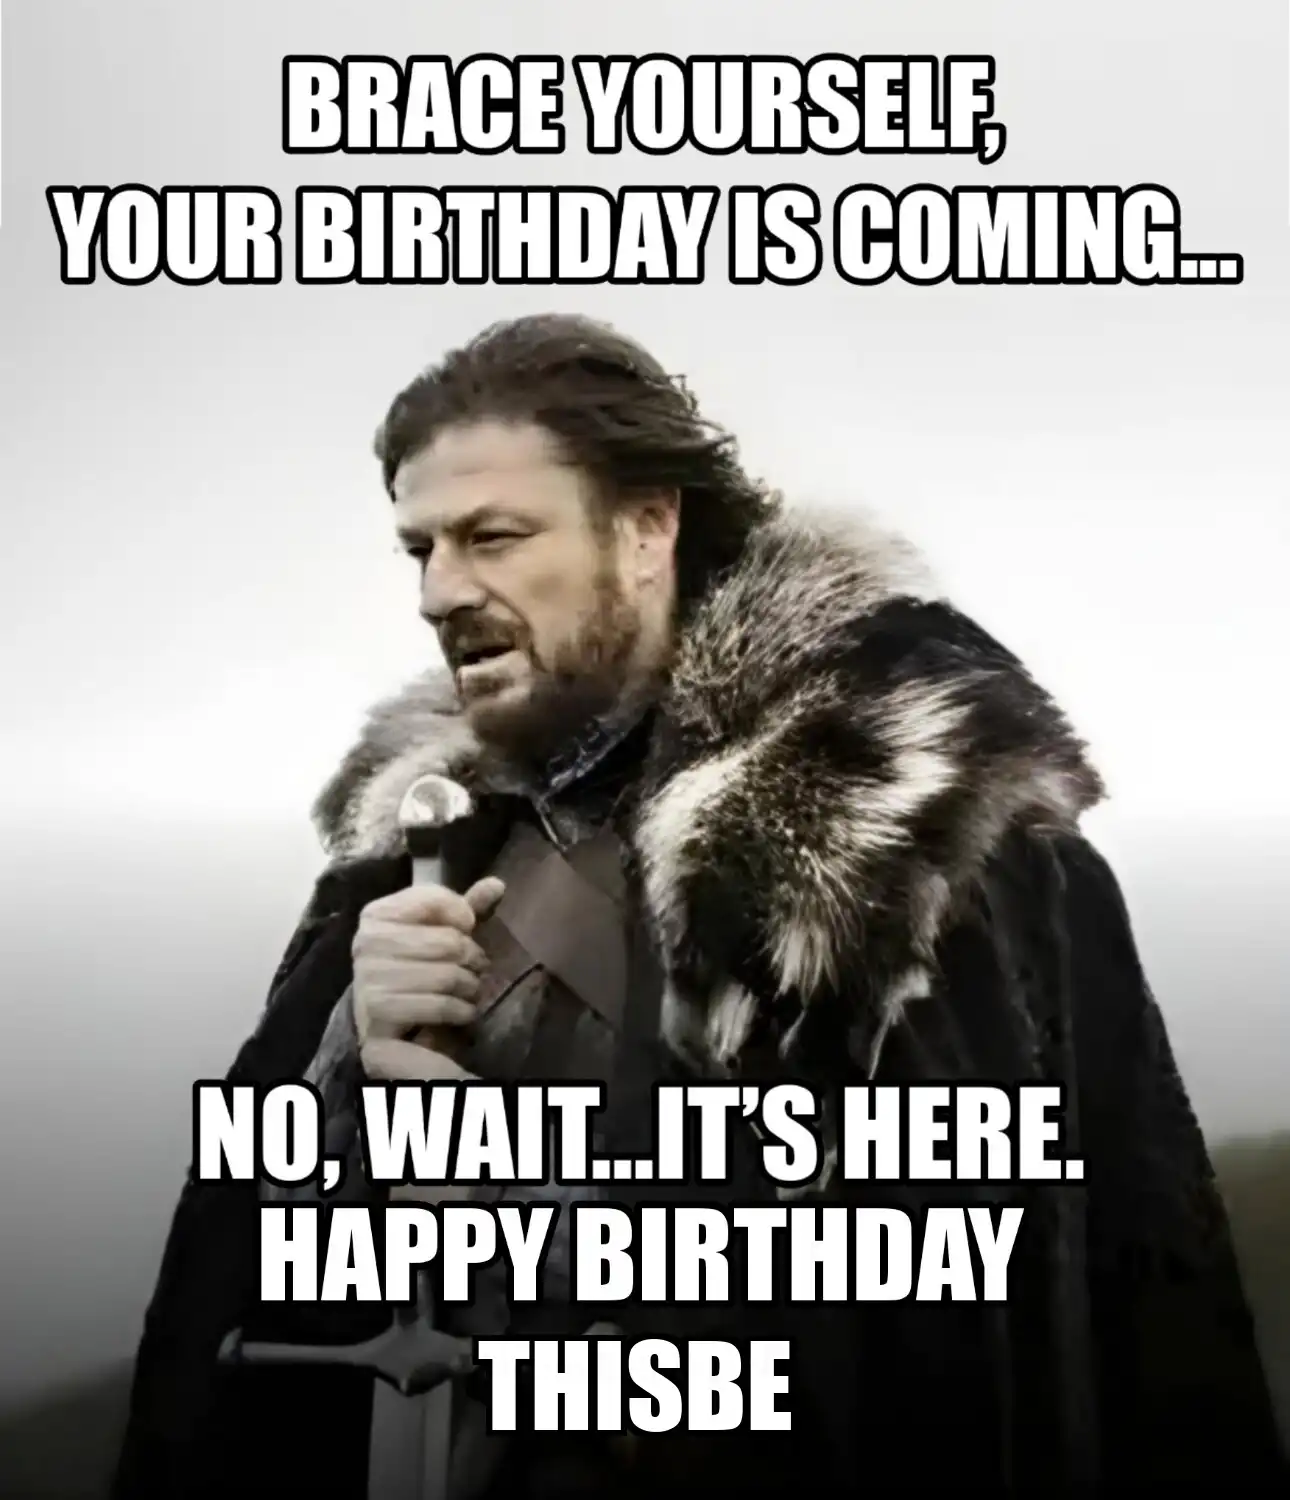 Happy Birthday Thisbe Brace Yourself Your Birthday Is Coming Meme